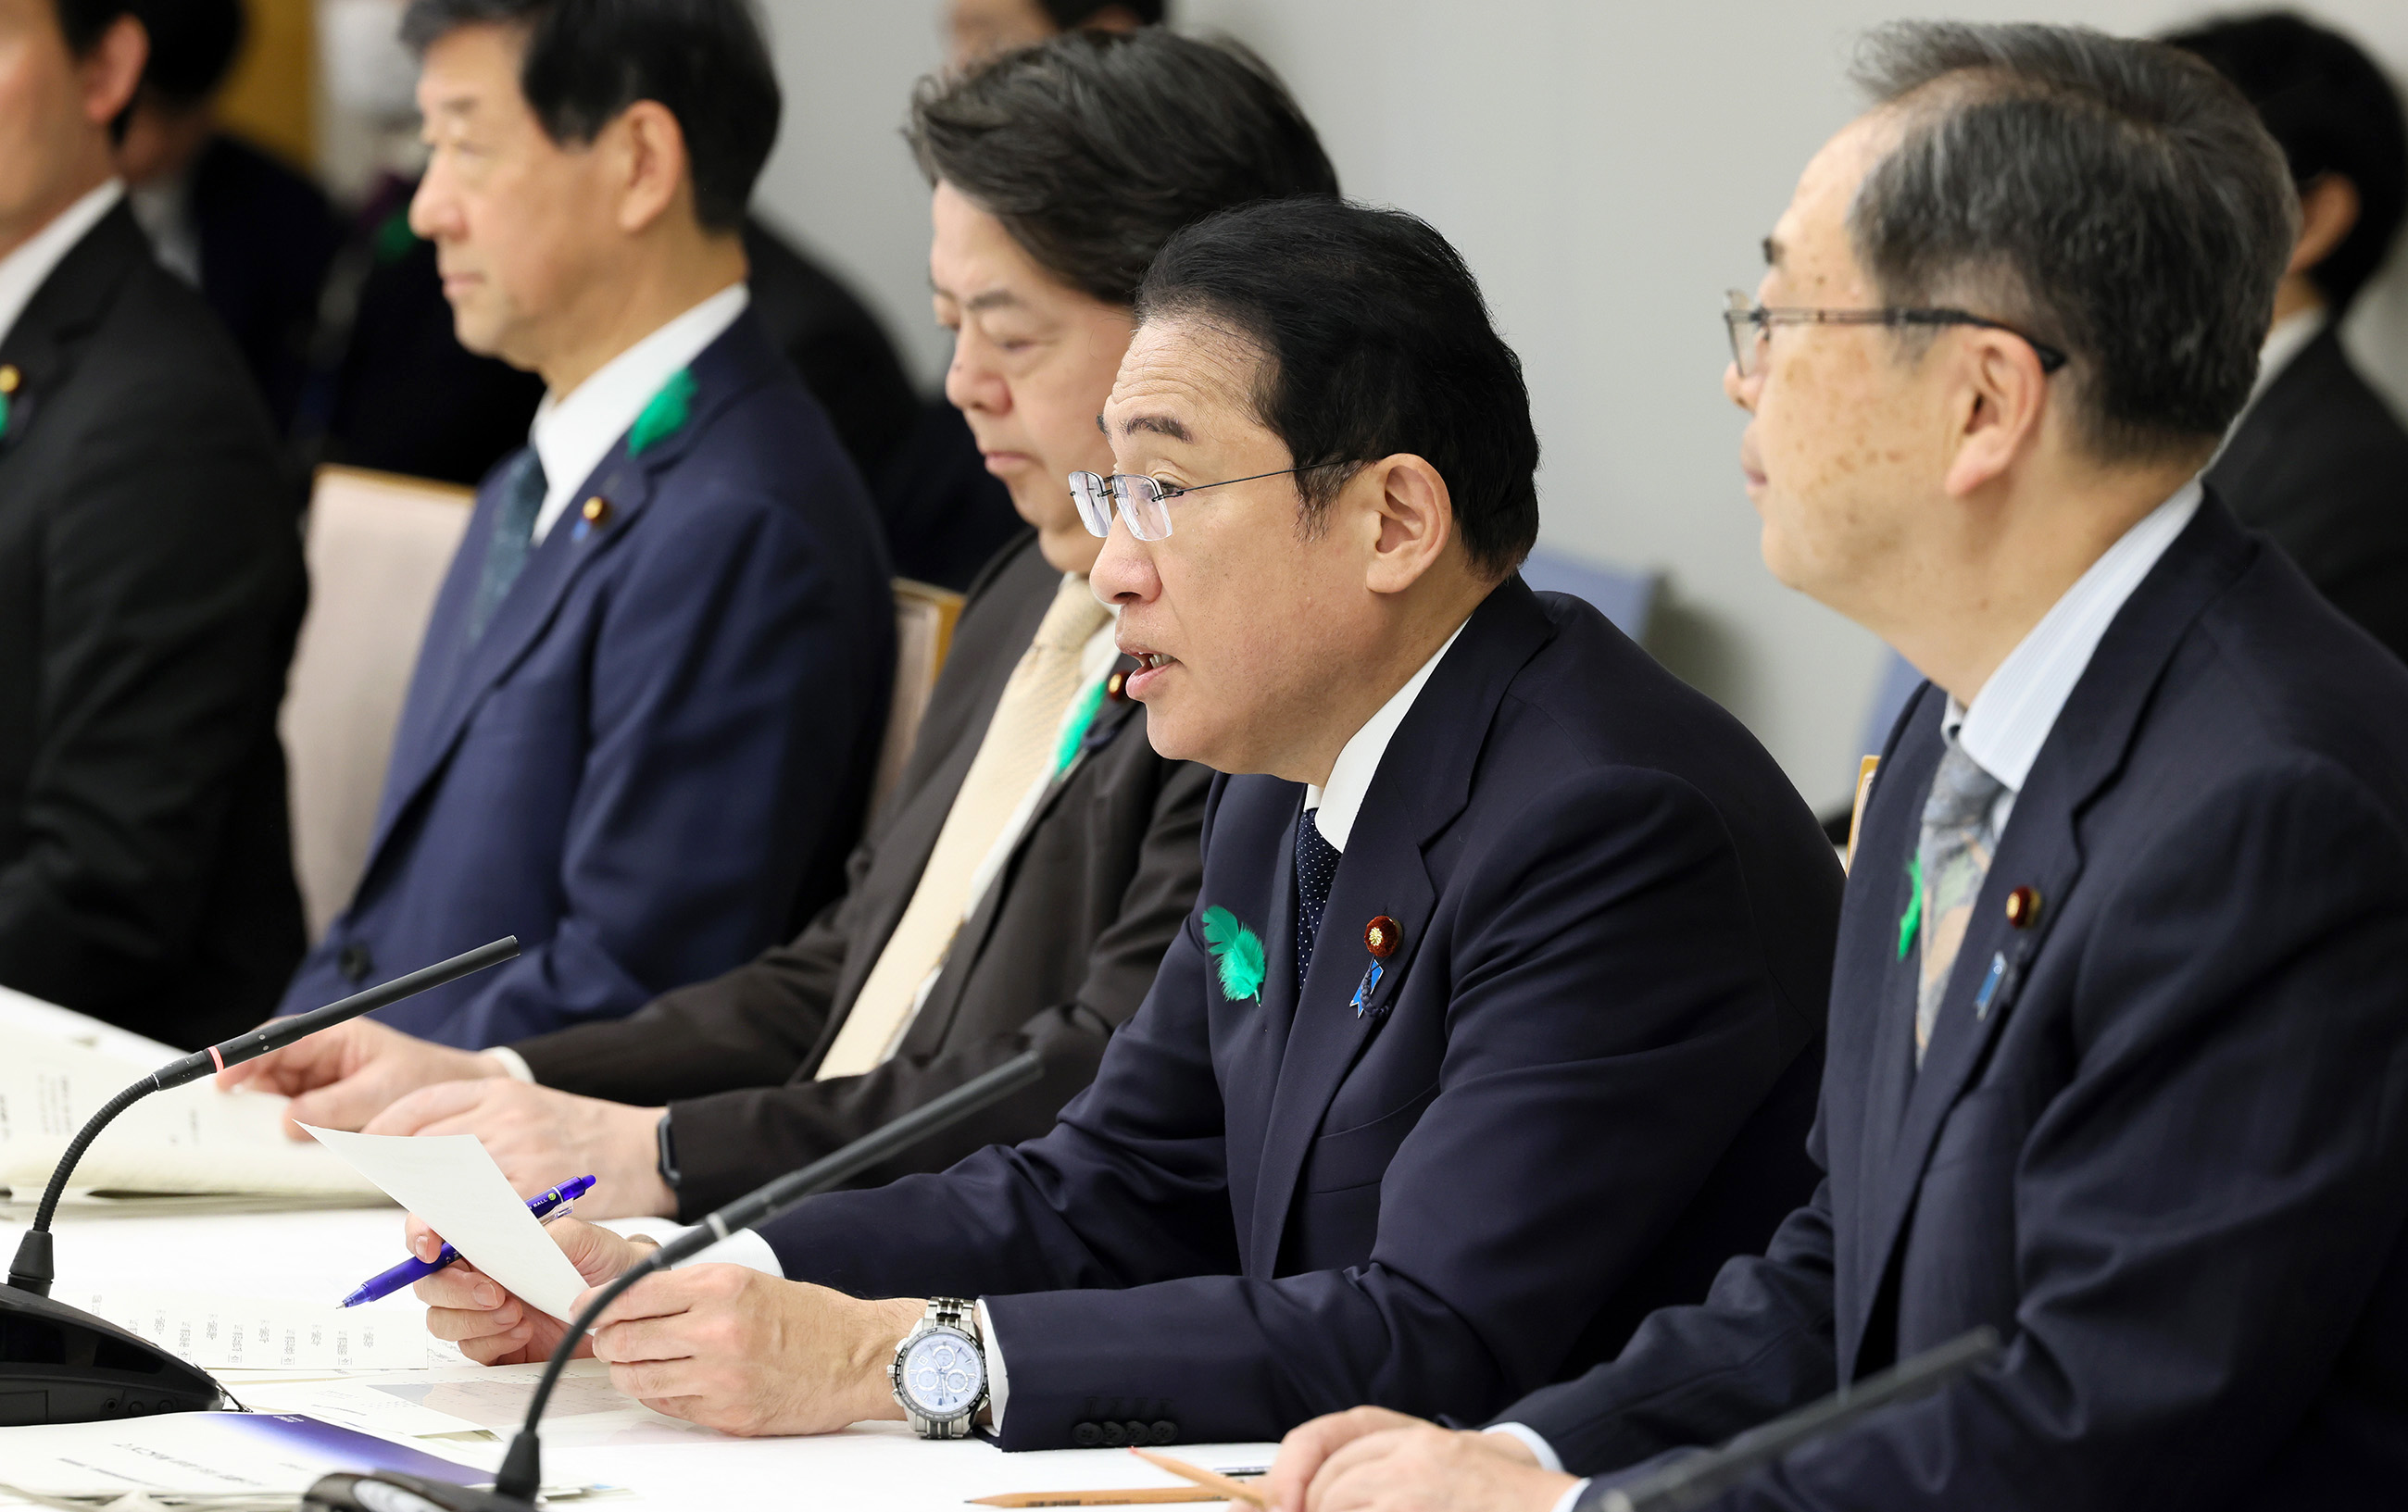 Ministerial Council on the Promotion of Japan as a Tourism-Oriented Country